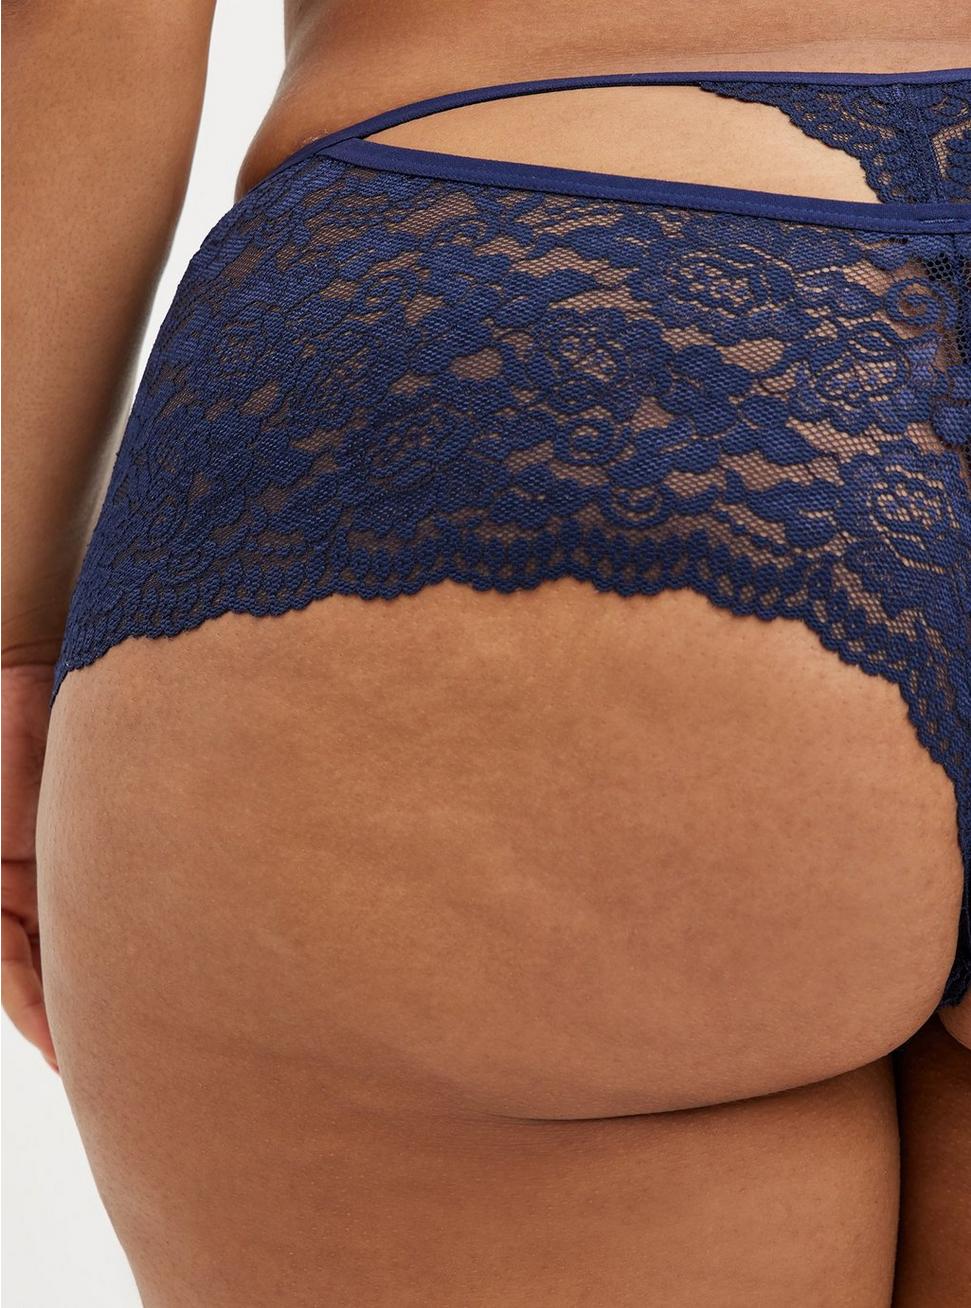 Plus Size - Lace Mid-Rise Cheeky Panty With T Back - Torrid